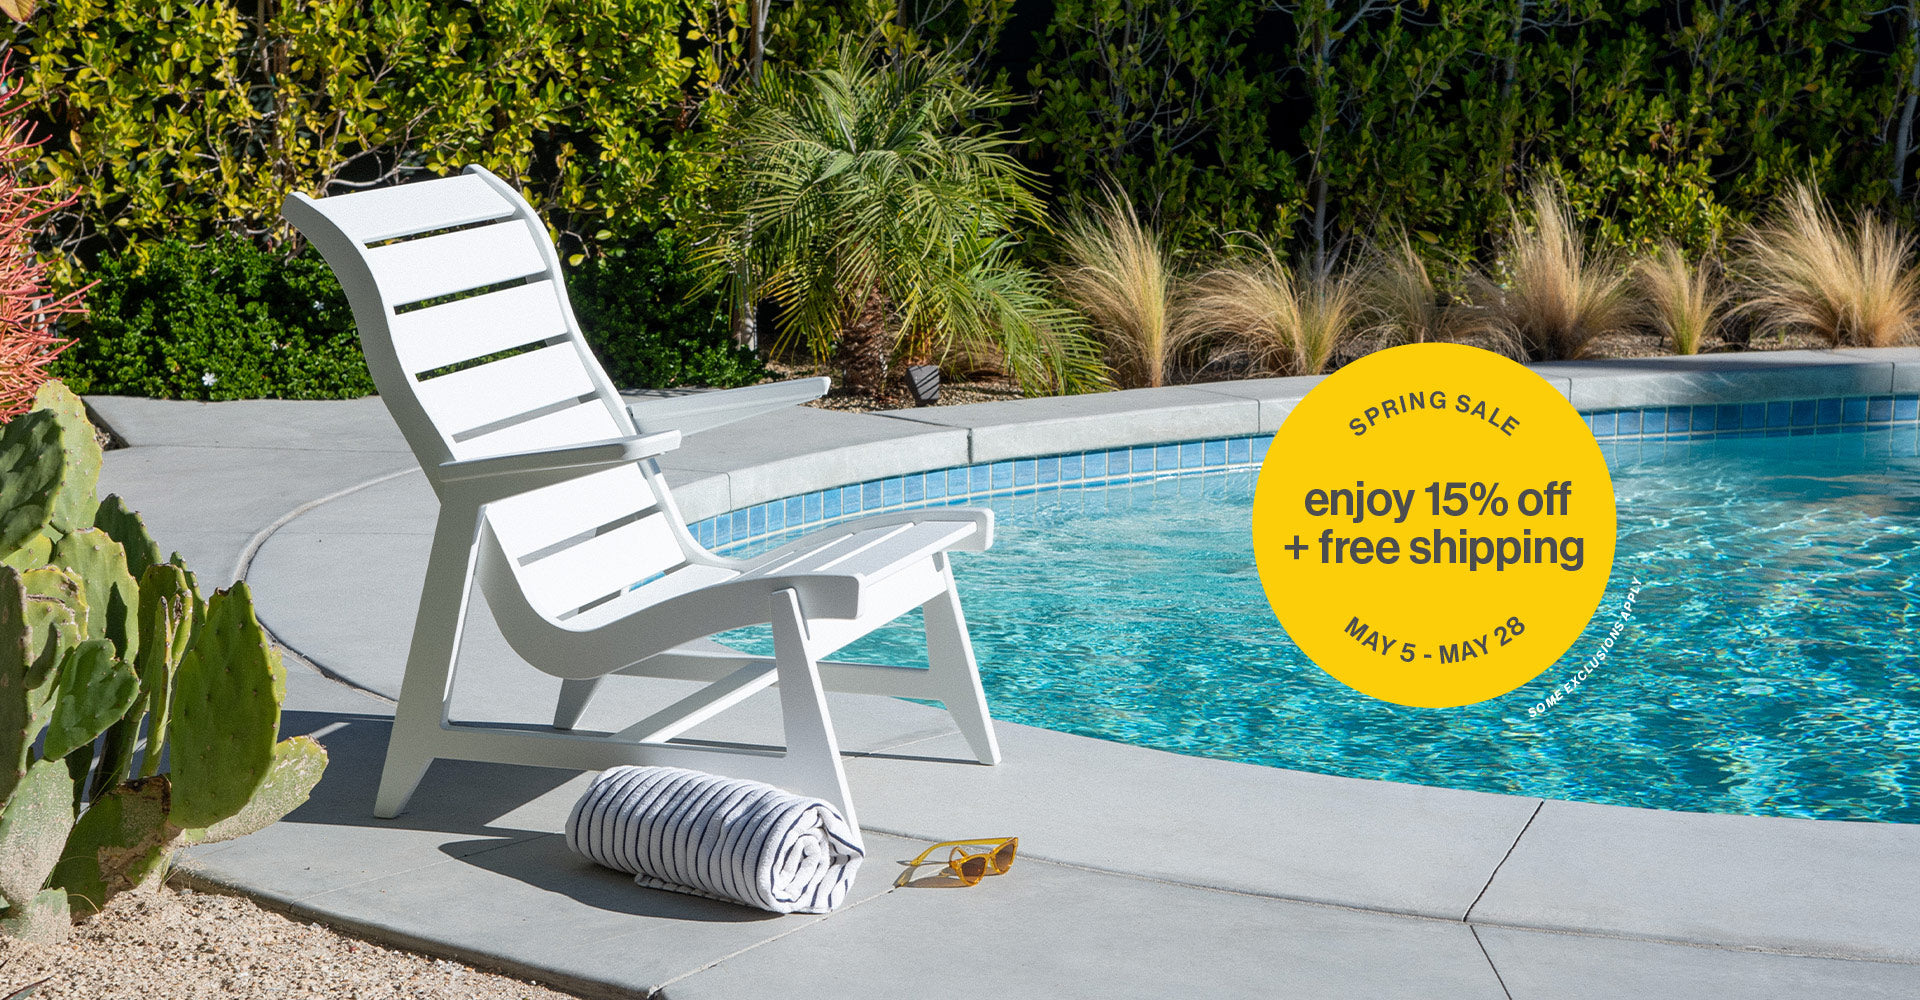 white rapson lounge chair next to pool in sun. Yellow circle to right of chair reads "SPRING SALE MAY 5 - 28" around inner edge. Middle of image text reads "enjoy 15% off + free shipping" small white text around lower left of circle reads "some exclusions apply"